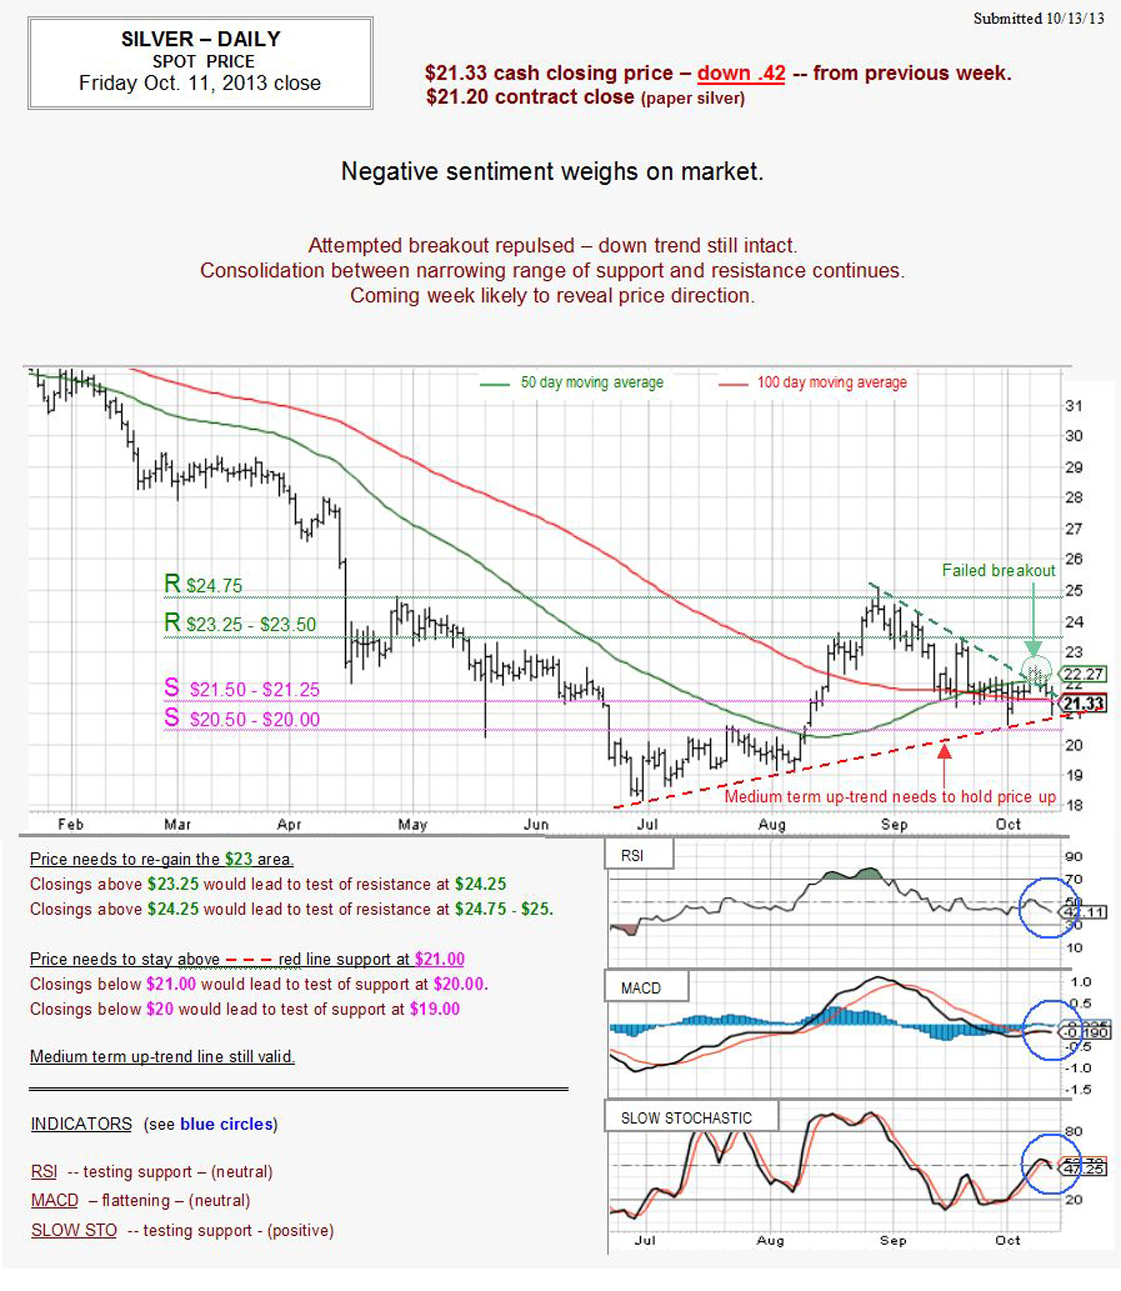 Oct 11, 2013 chart & commentary